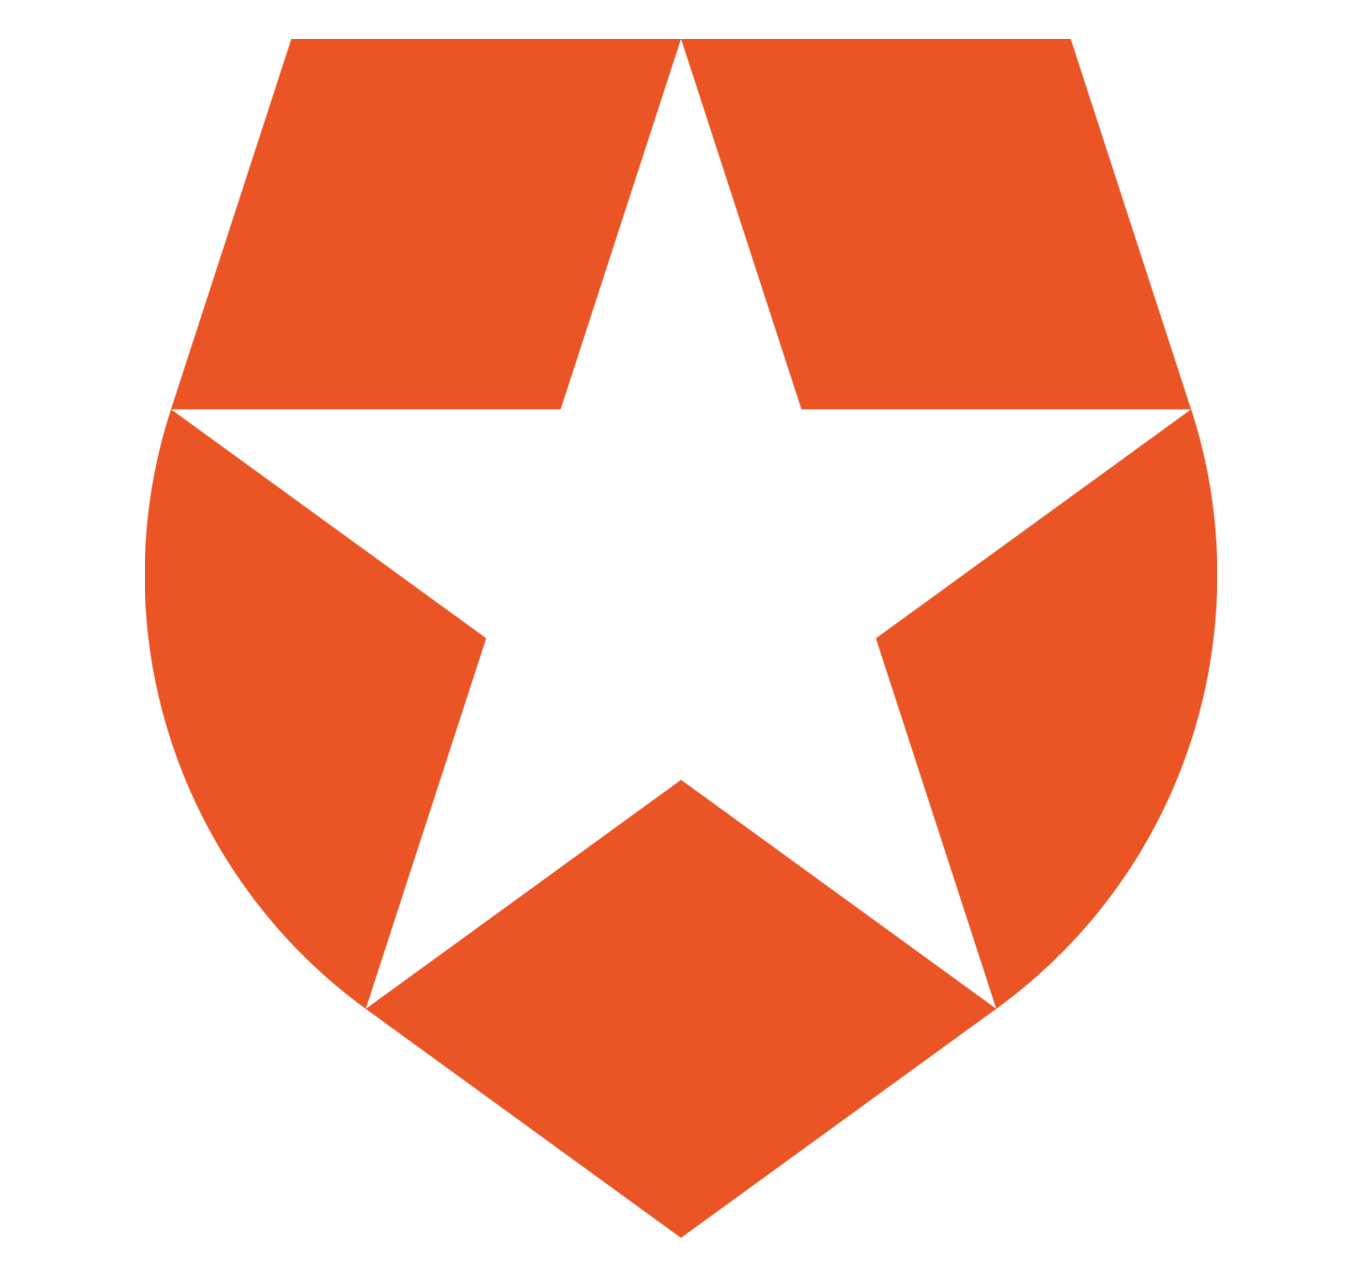 Image of Auth0 logo icon - an orange shield with a white star graphic in the center.